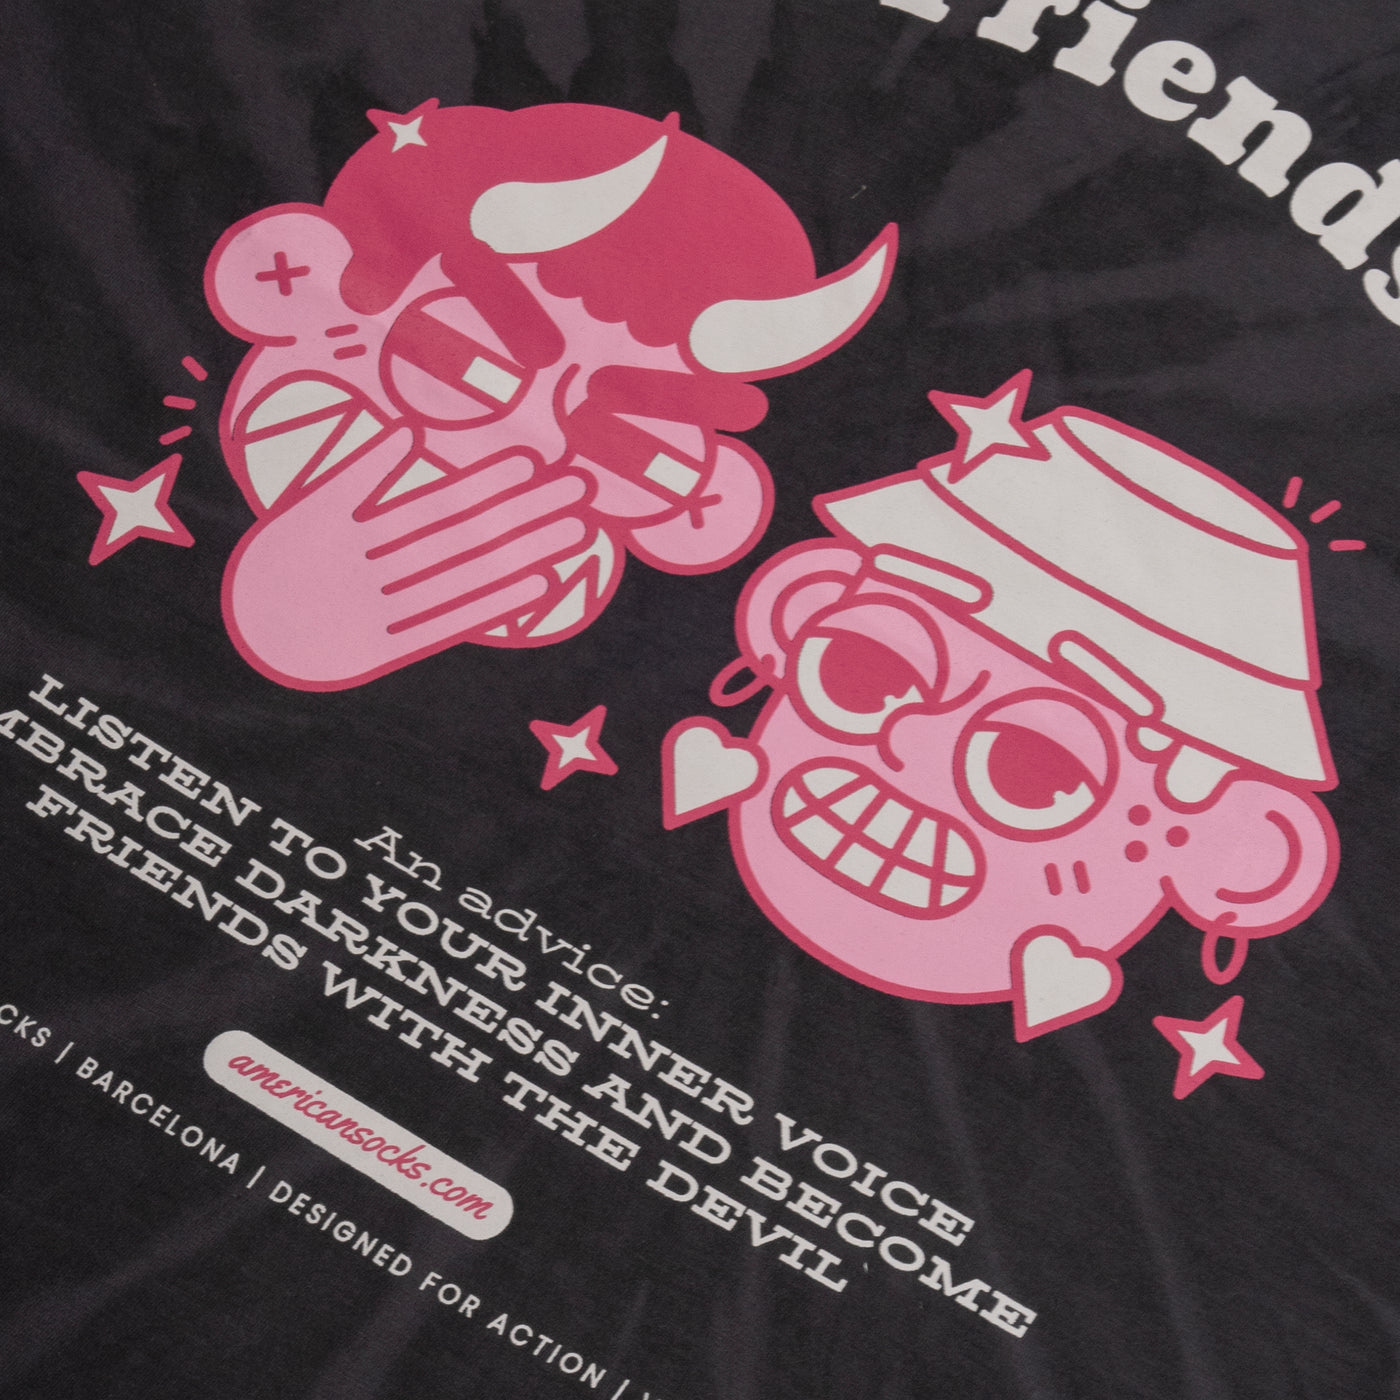 Friends with the Devil - Camiseta